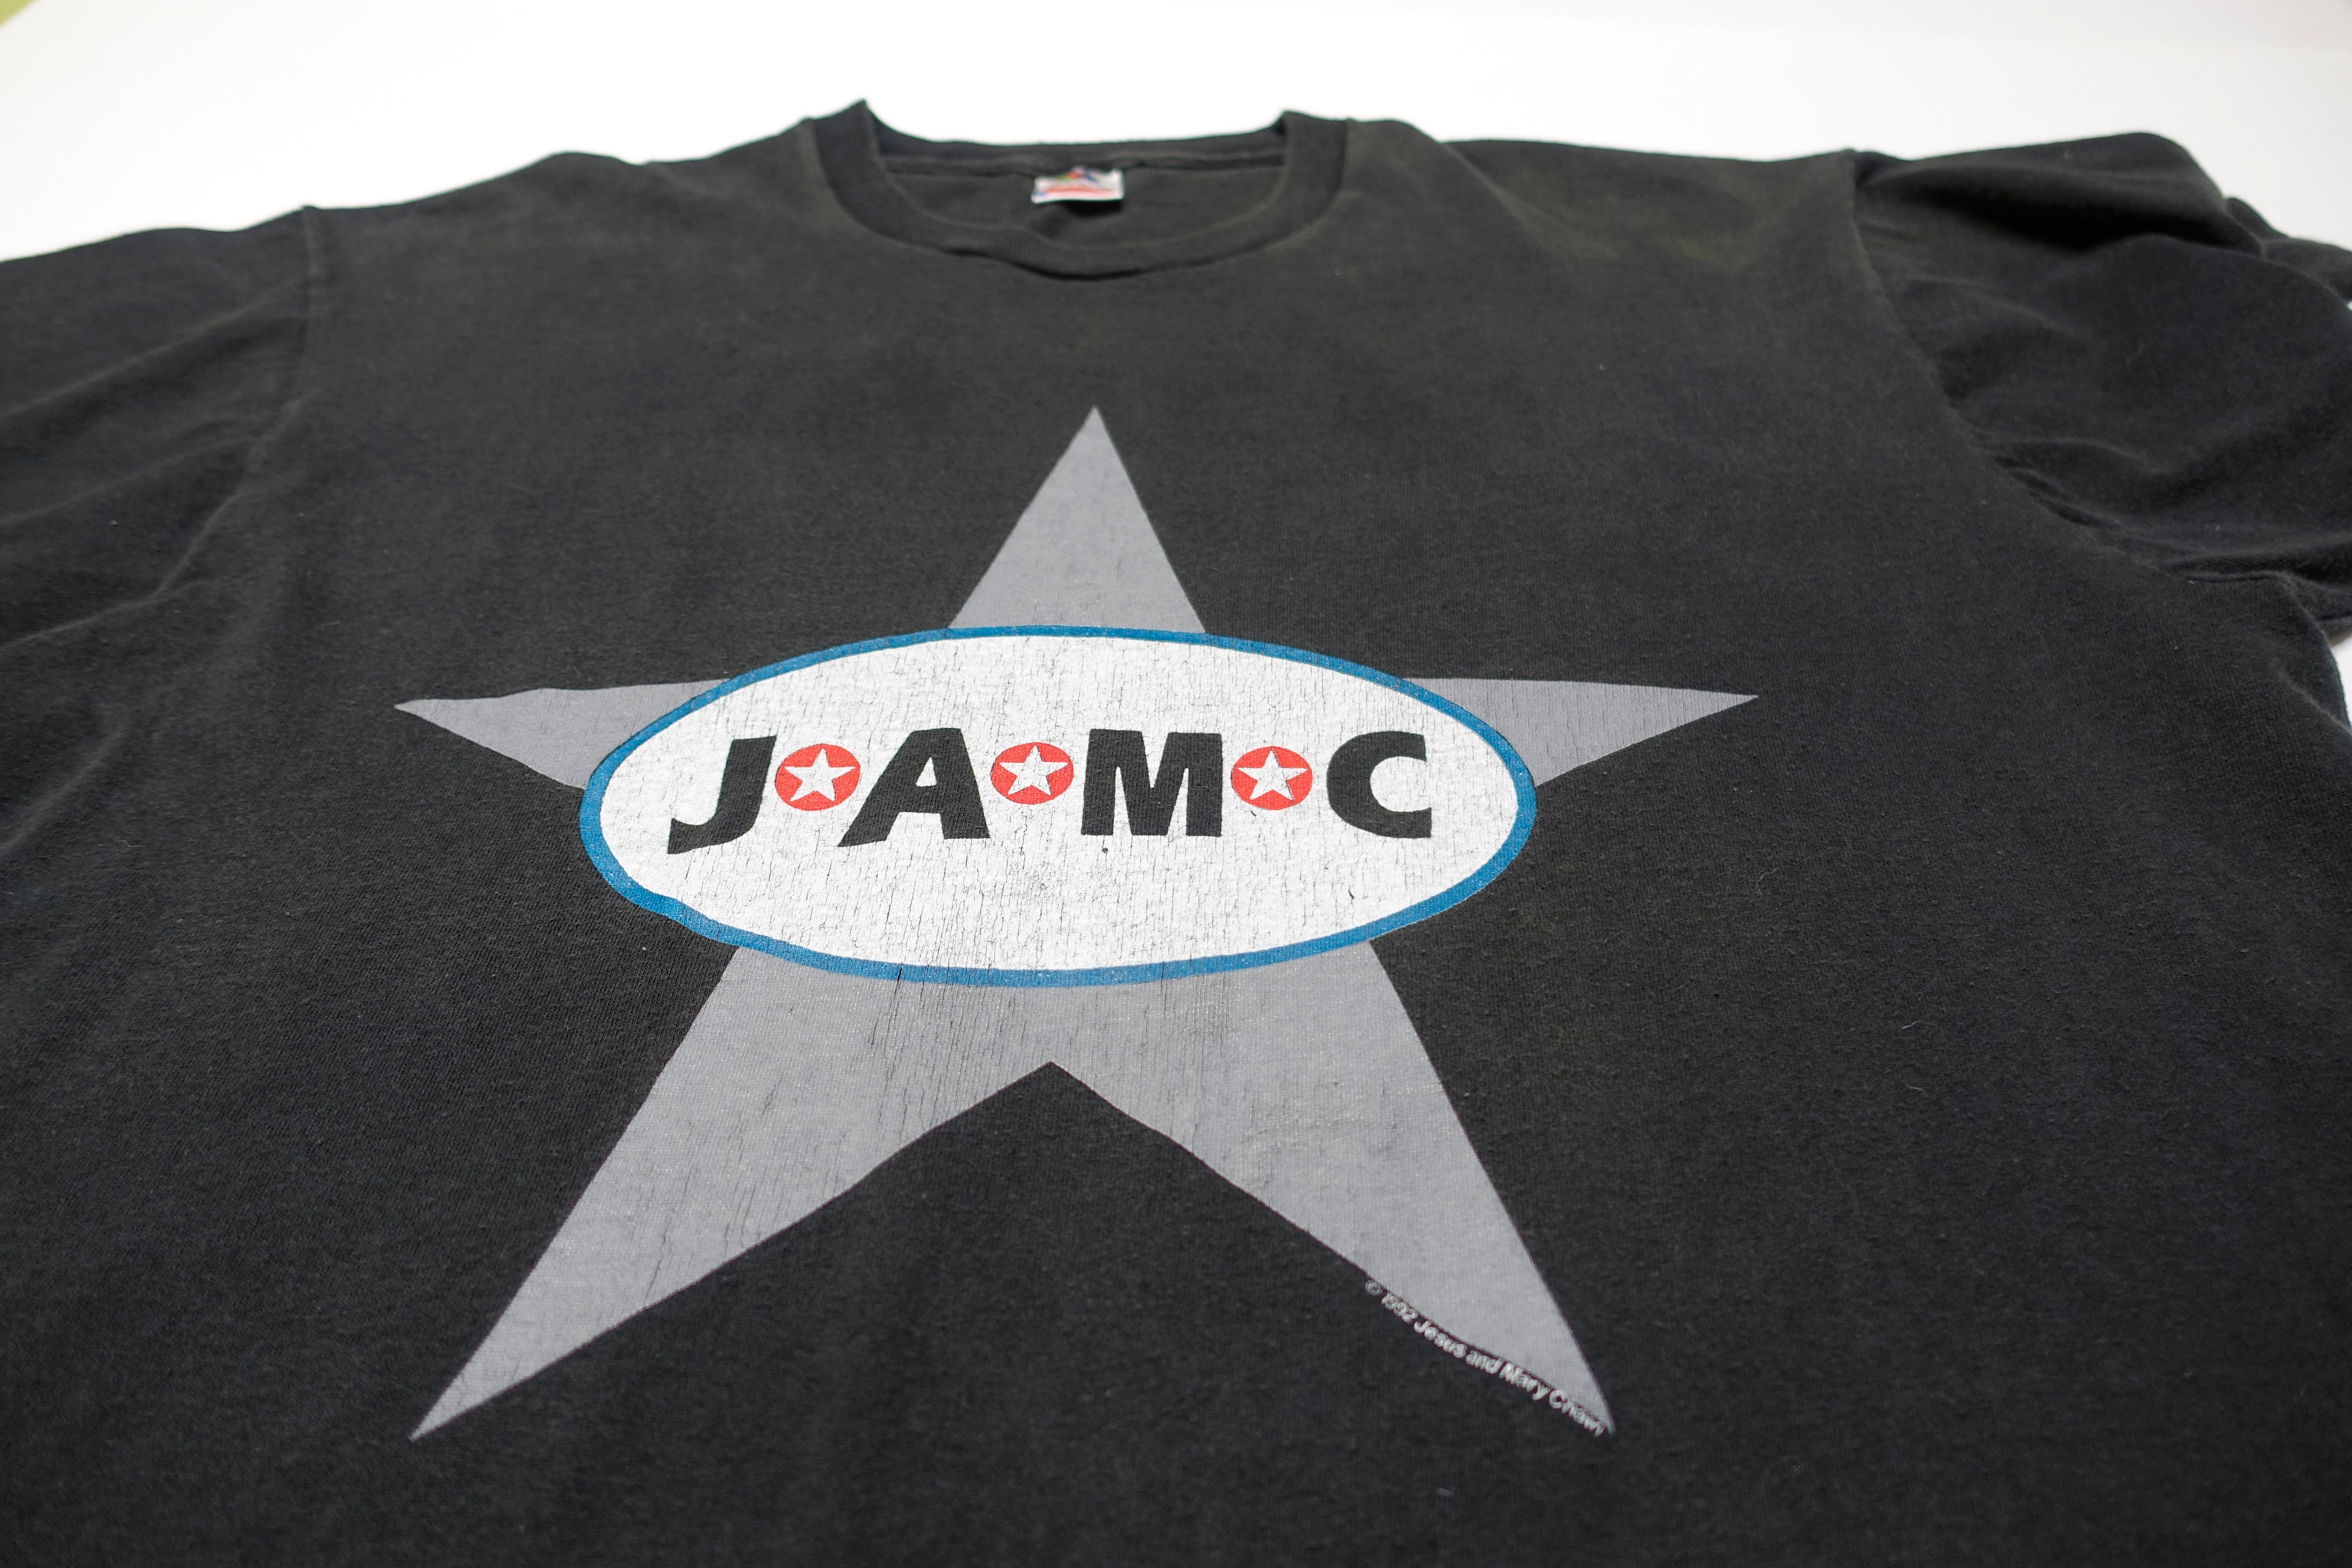 Jesus And Mary Chain - Honey's Dead / JAMC Star 1992 Tour Shirt Size XL